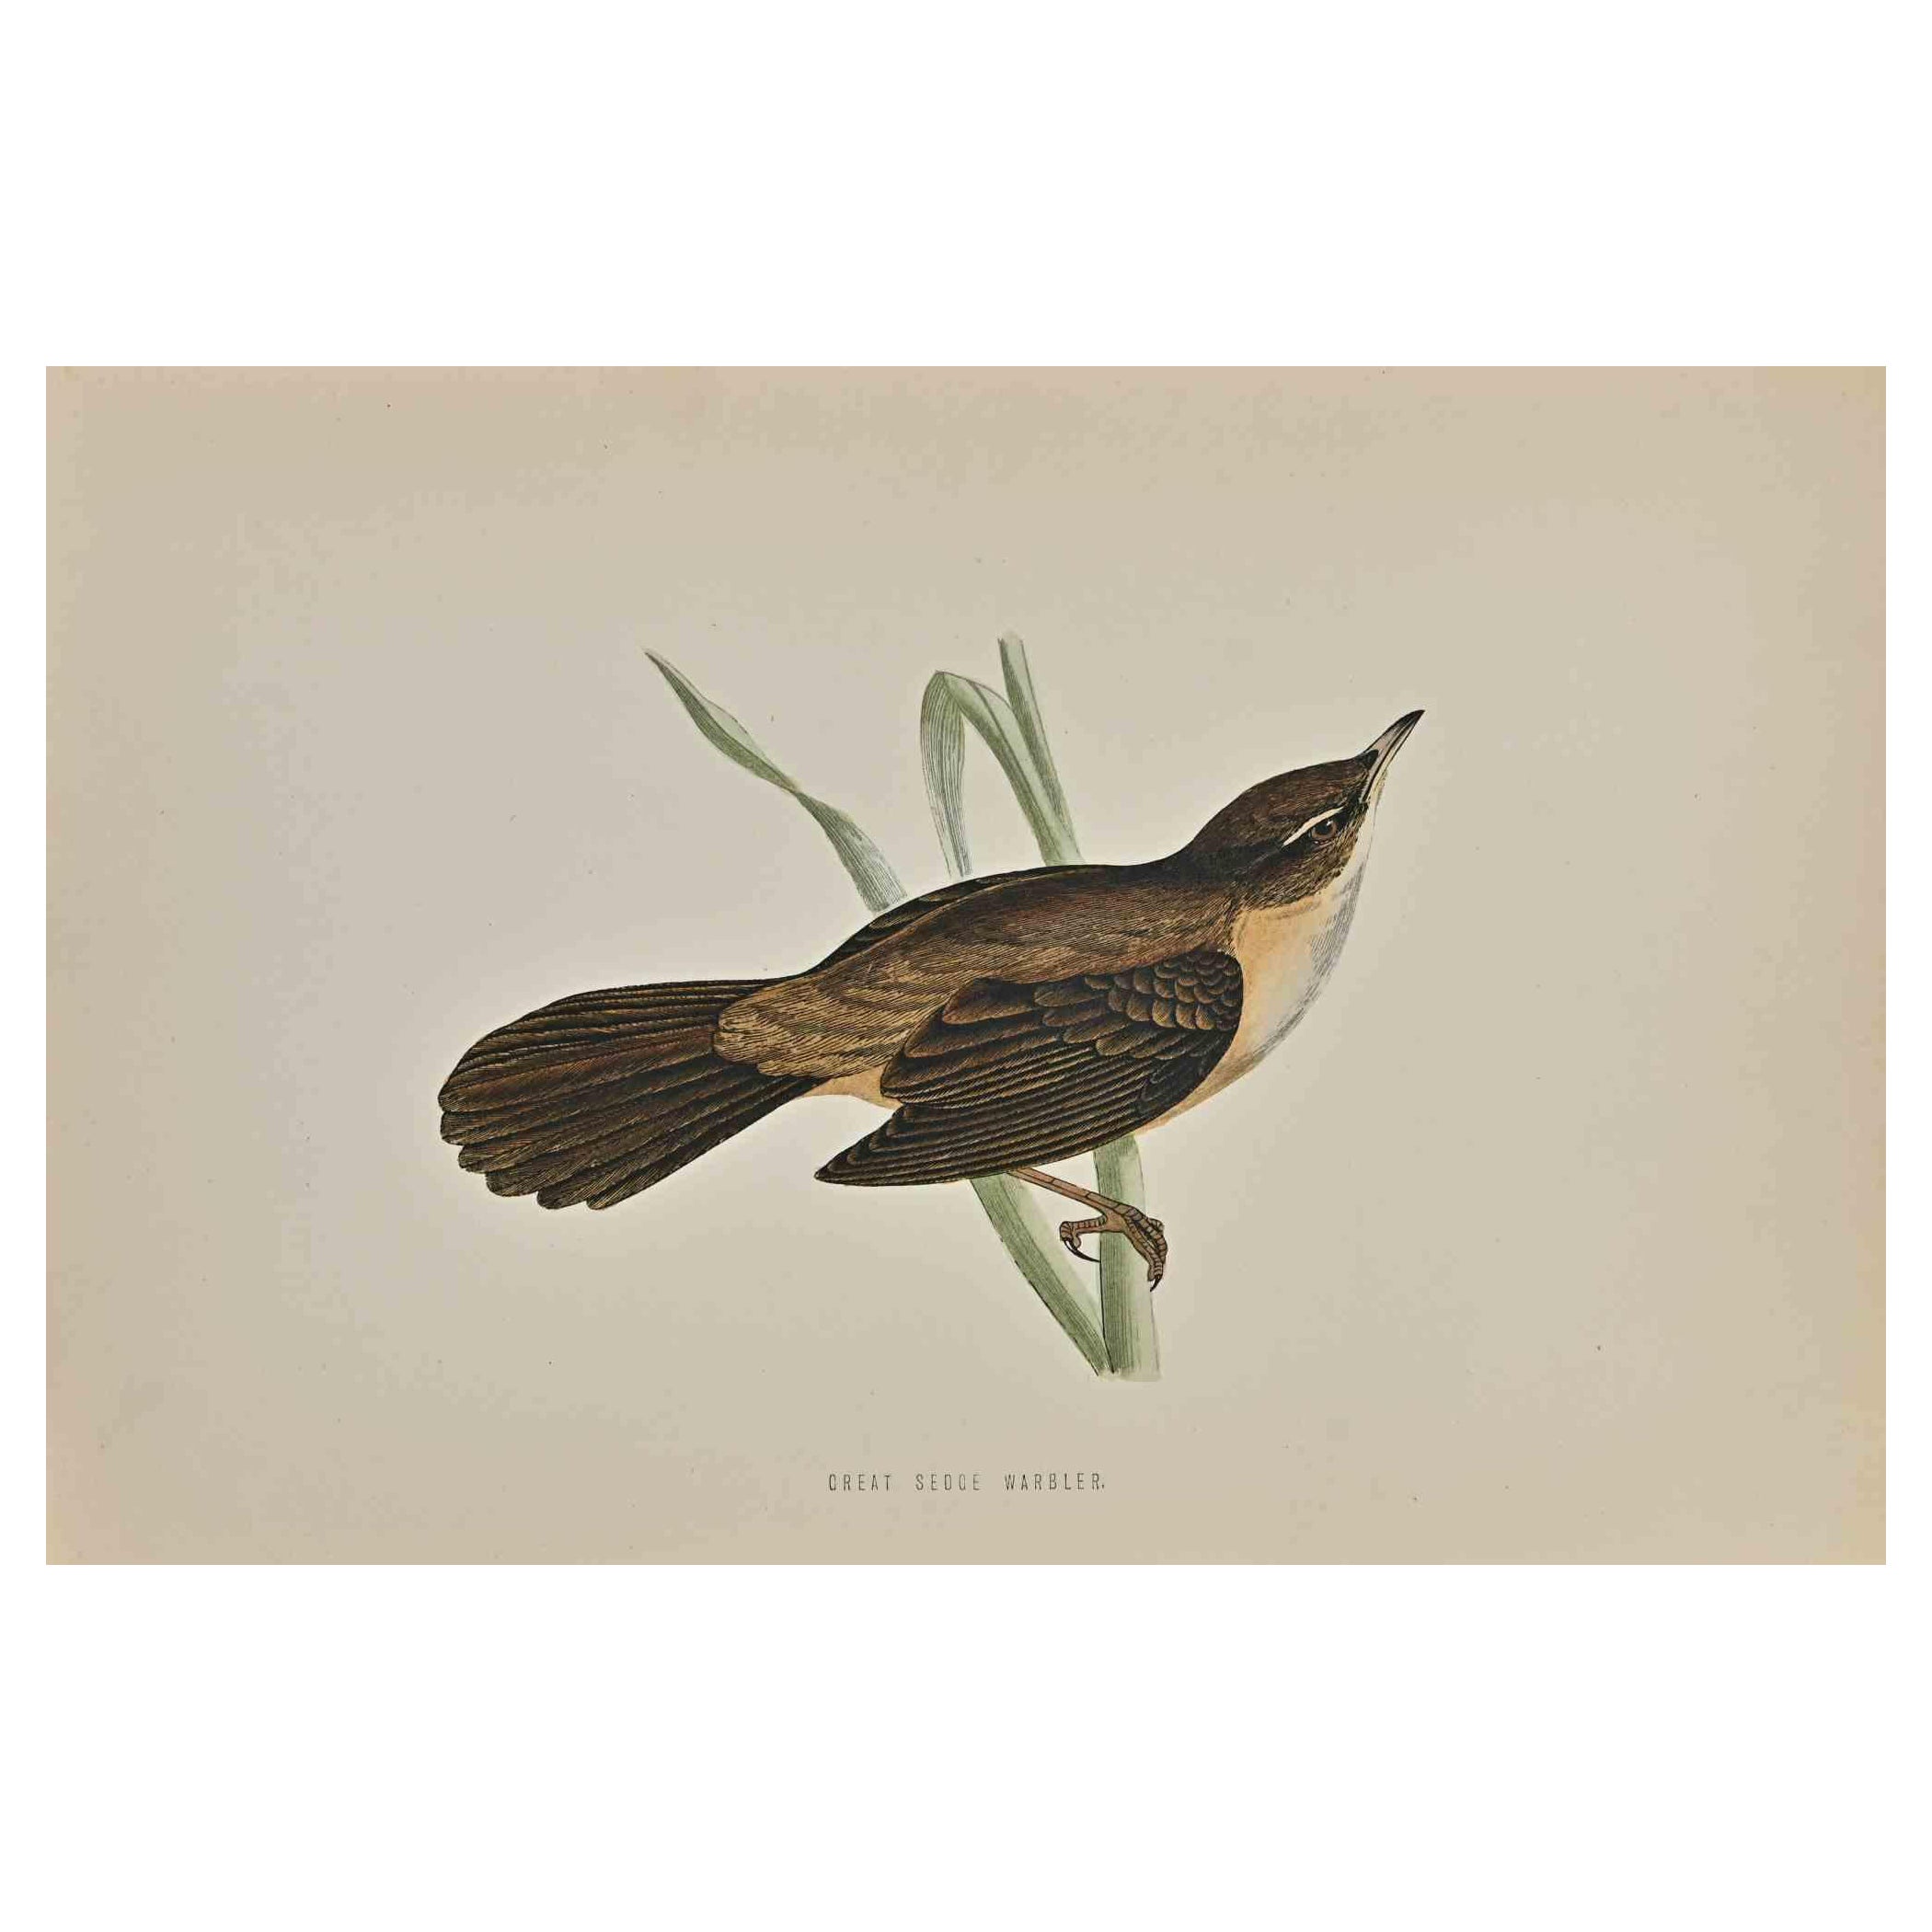 Great Sedge Warbler is a modern artwork realized in 1870 by the British artist Alexander Francis Lydon (1836-1917) . 

Woodcut print, hand colored, published by London, Bell & Sons, 1870.  Name of the bird printed in plate. This work is part of a